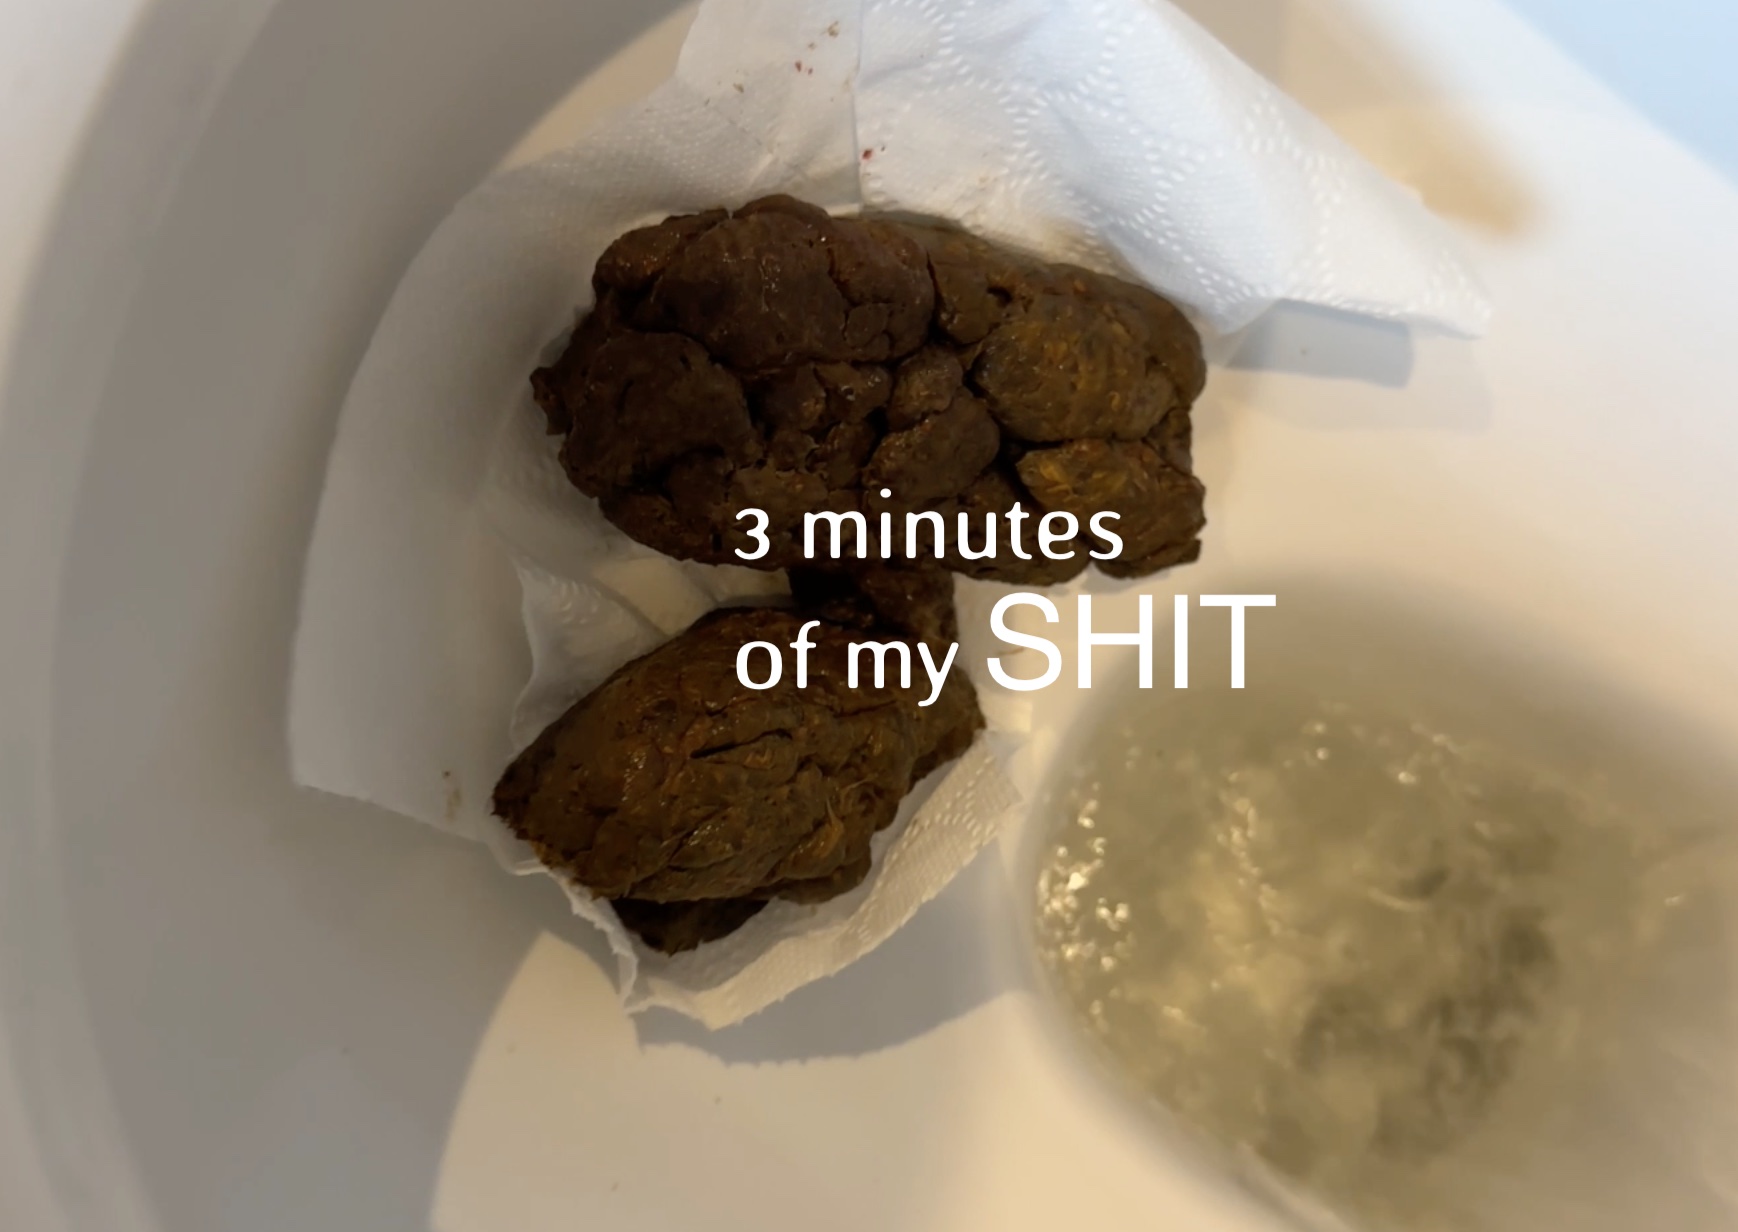 3 Minutes of my shit